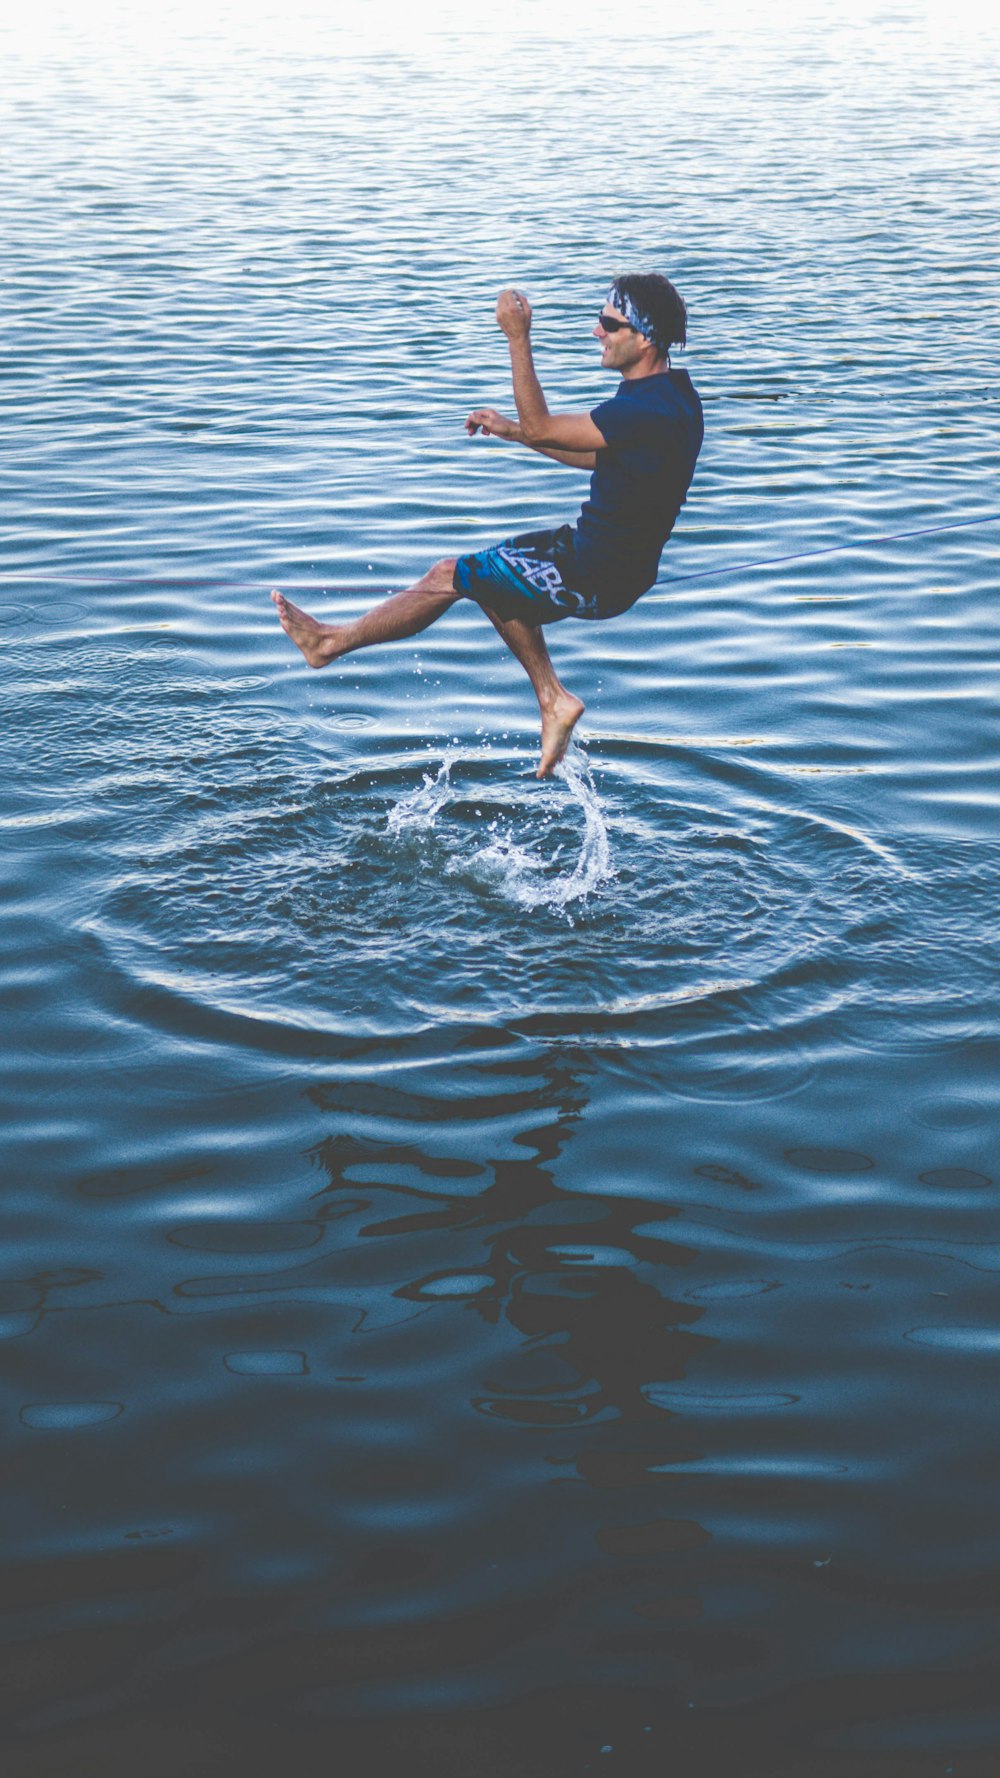 panning photograph of man on water